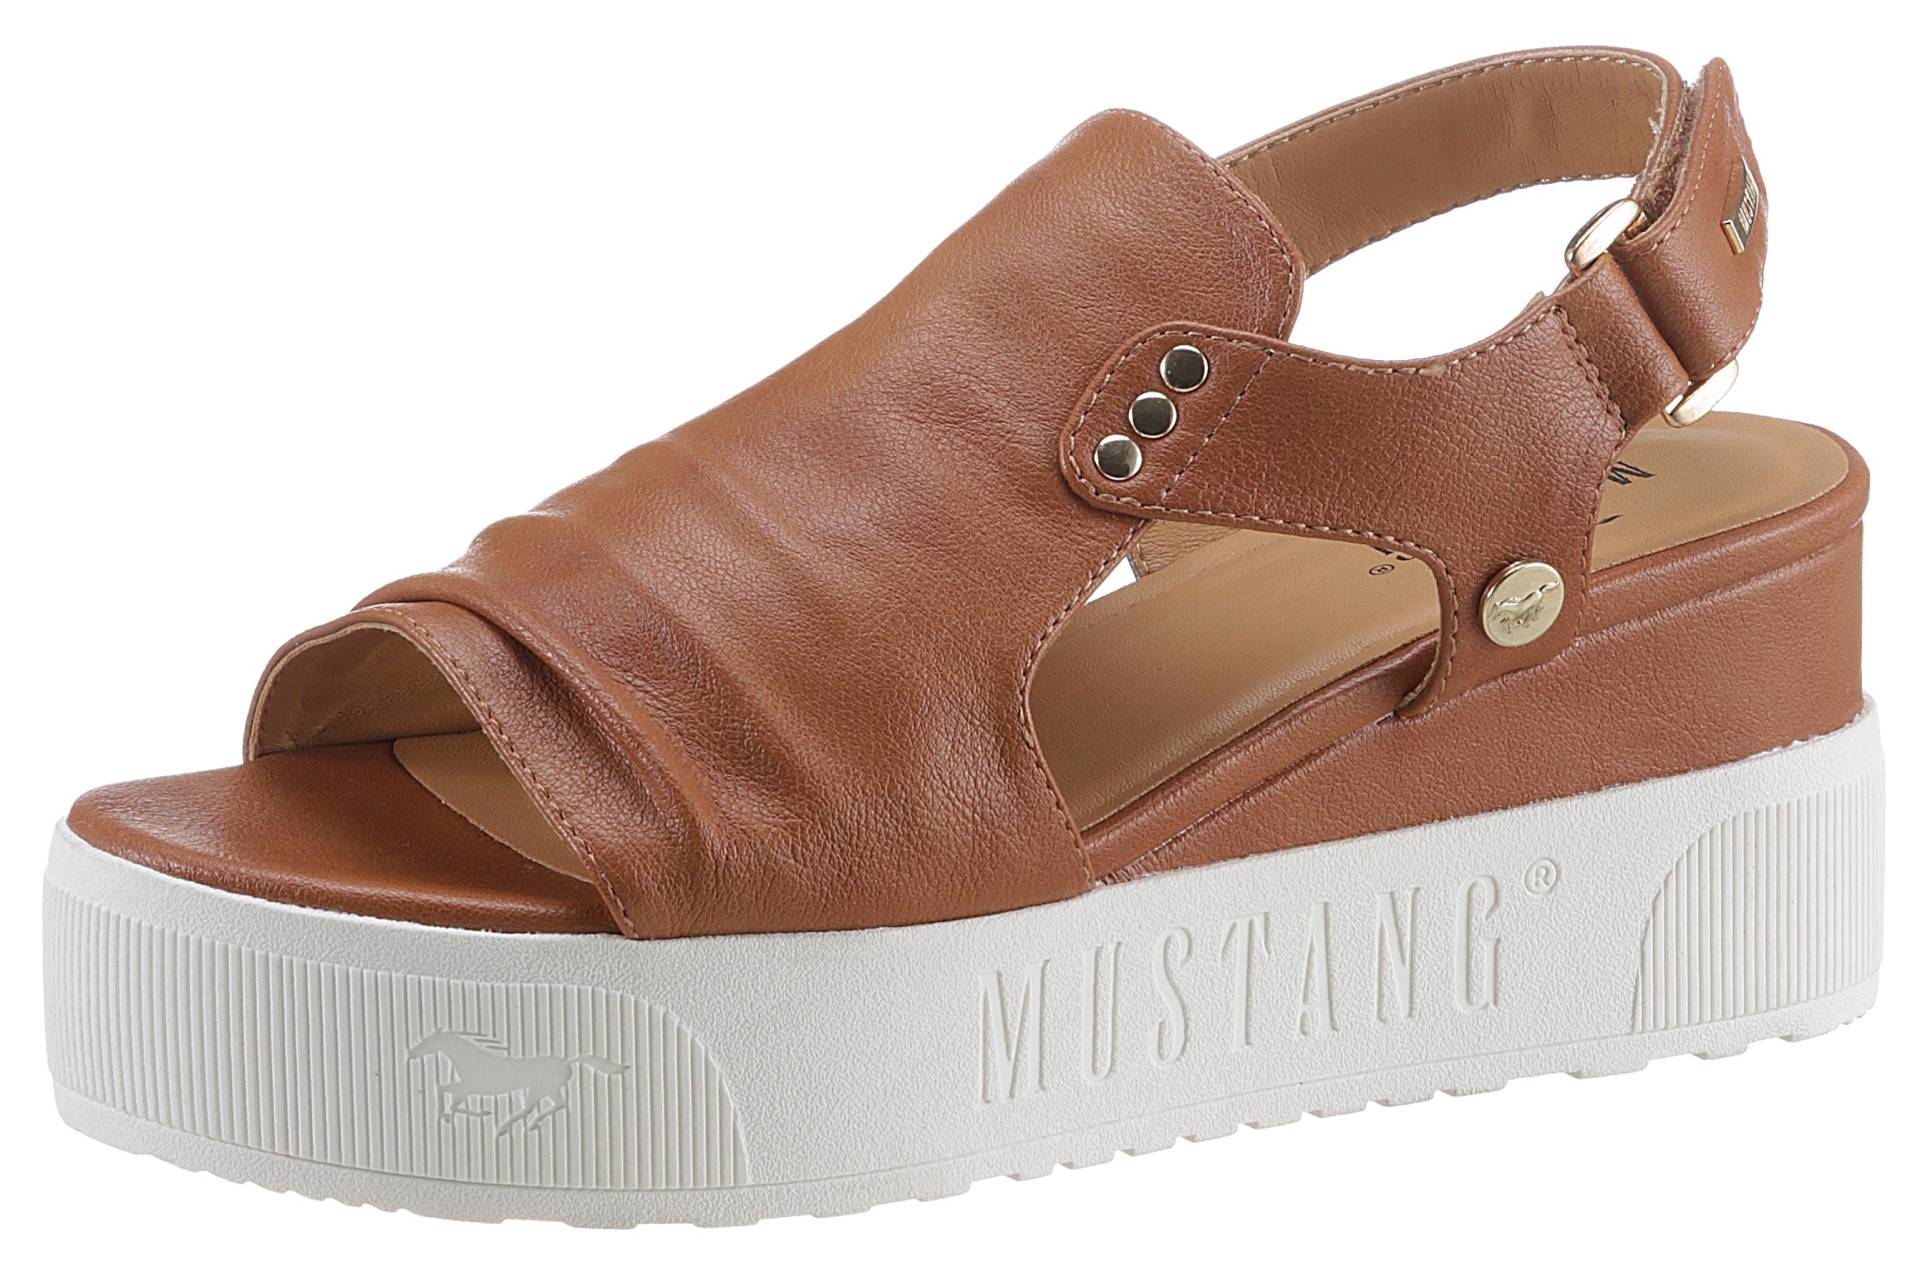 Mustang Shoes Keilsandalette von mustang shoes